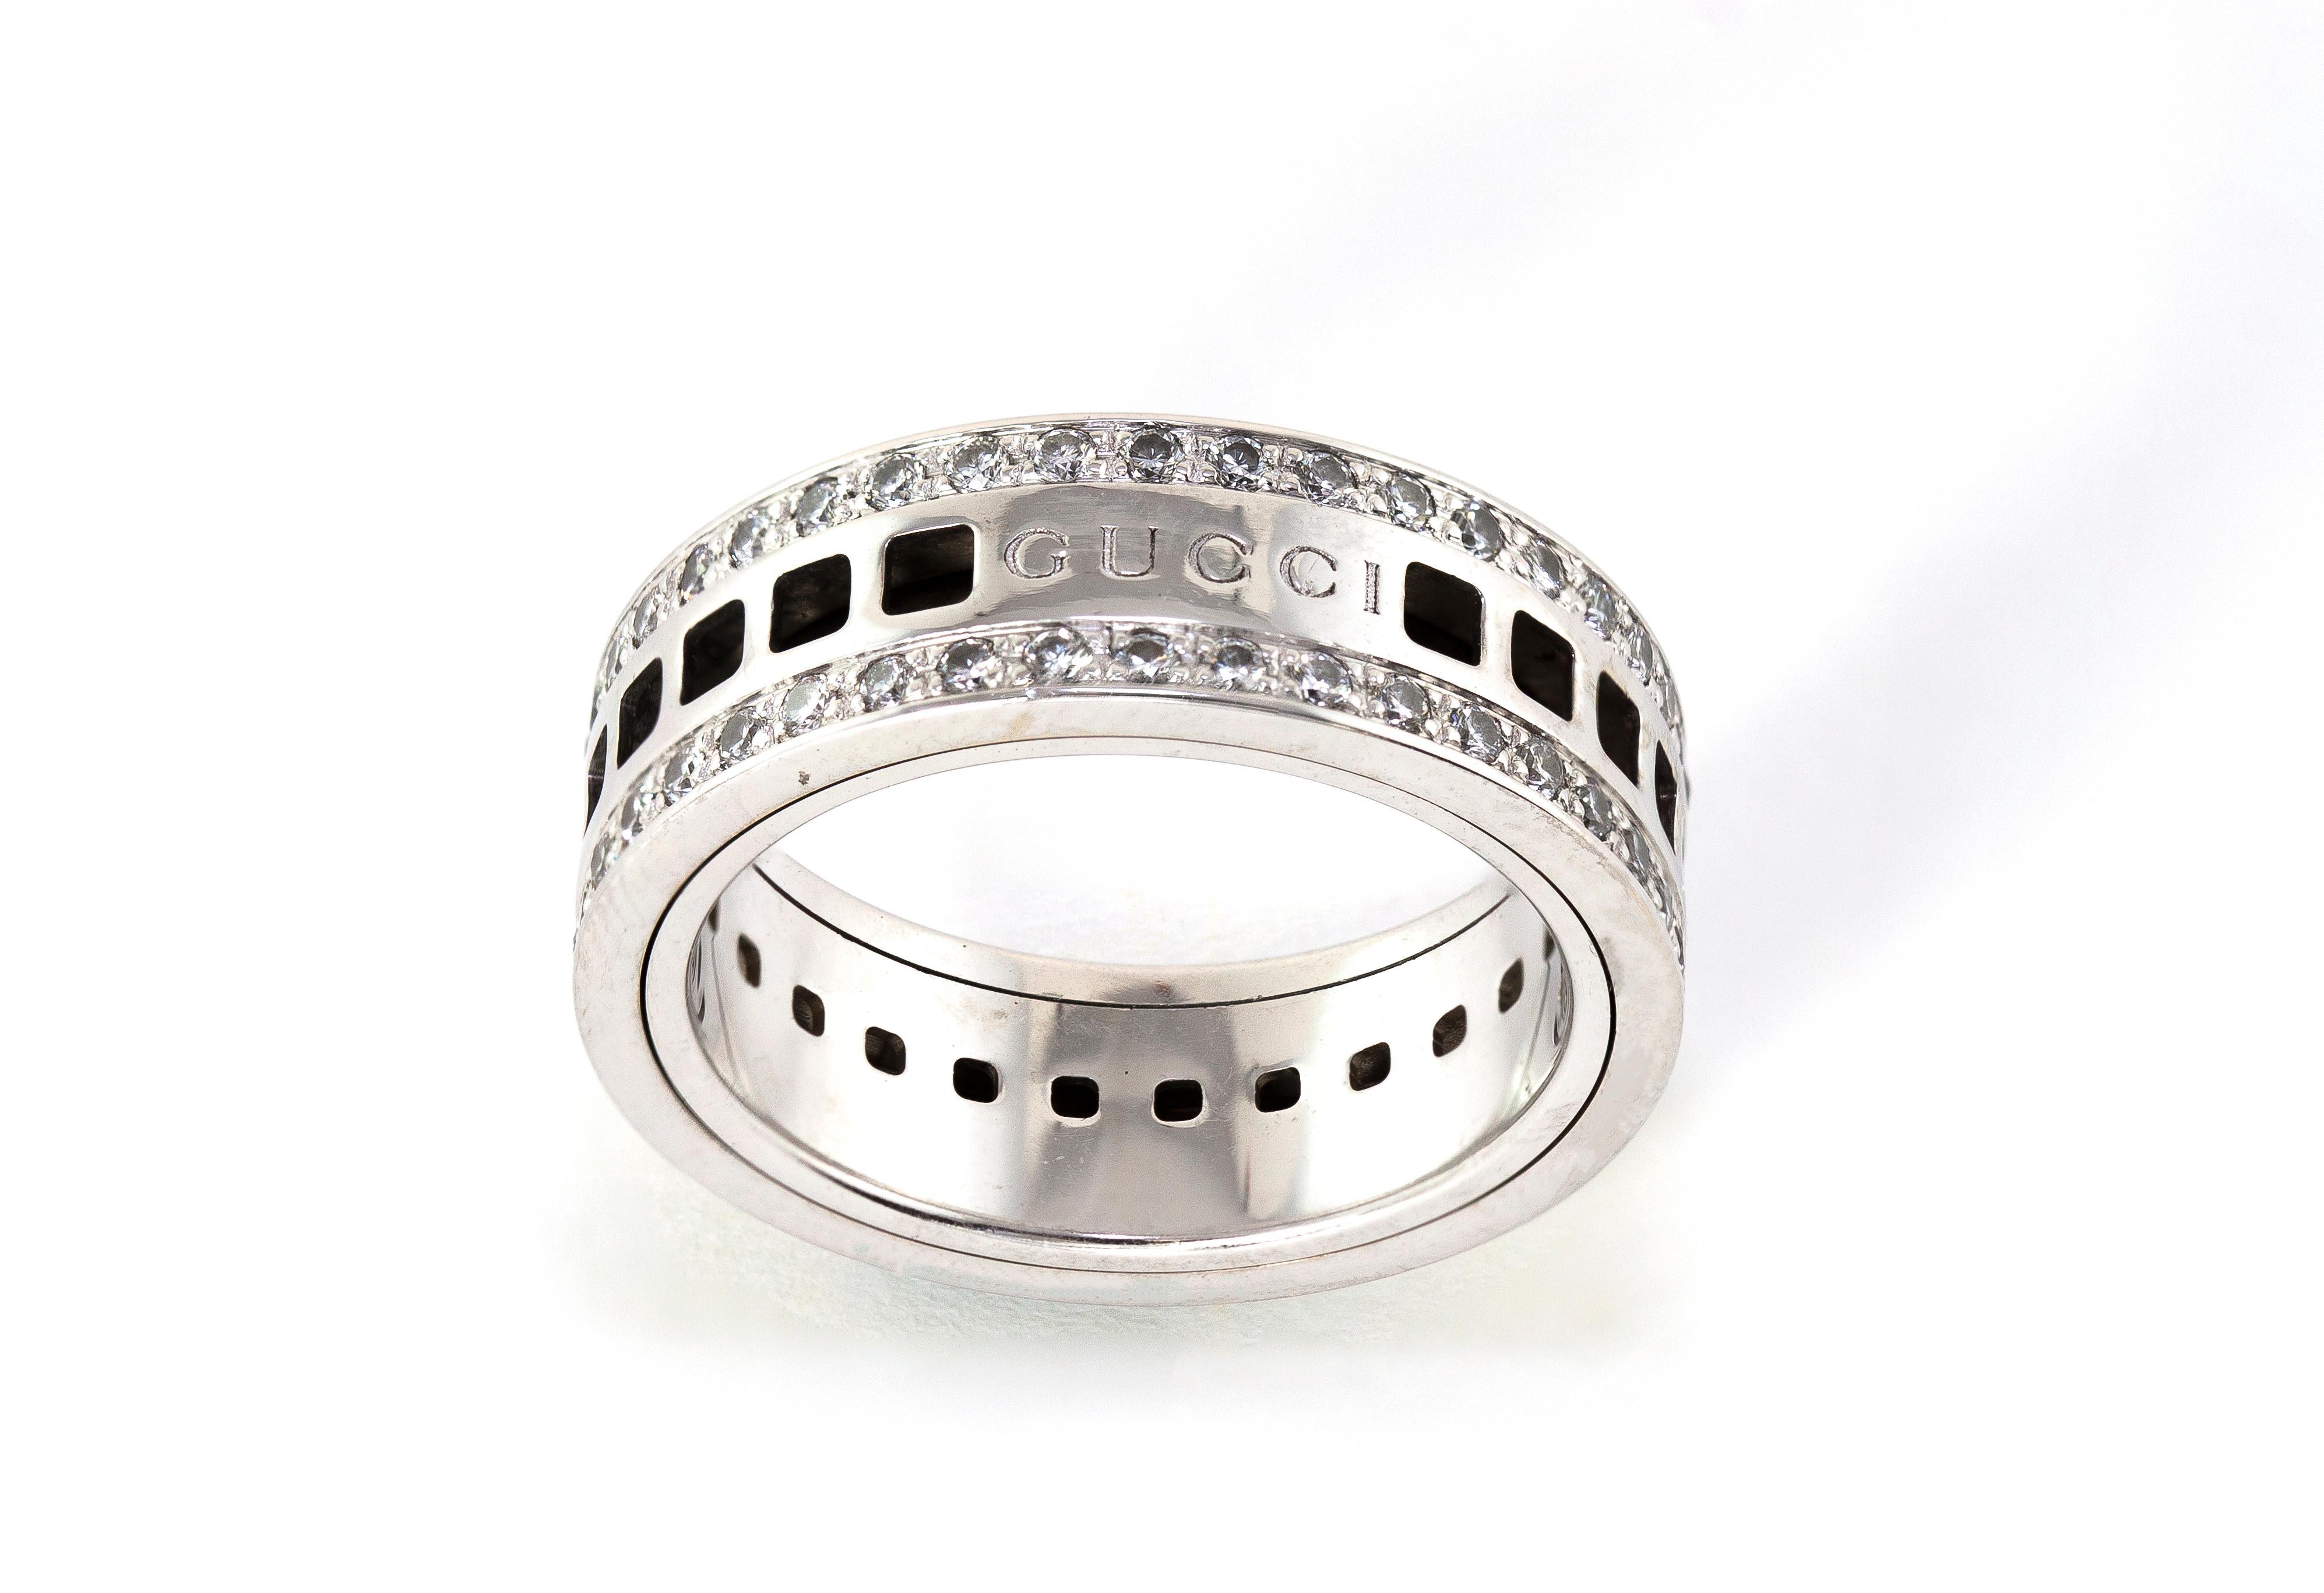  Gucci ring in 18 karat white gold. It has two rows of diamonds that total about 0.80 carats. The outer band spins on your finger. The inside of the ring is hallmarked Gucci, 750, made in Italy, and 17 for the Italian ring size.

UK Ring Size : P
US